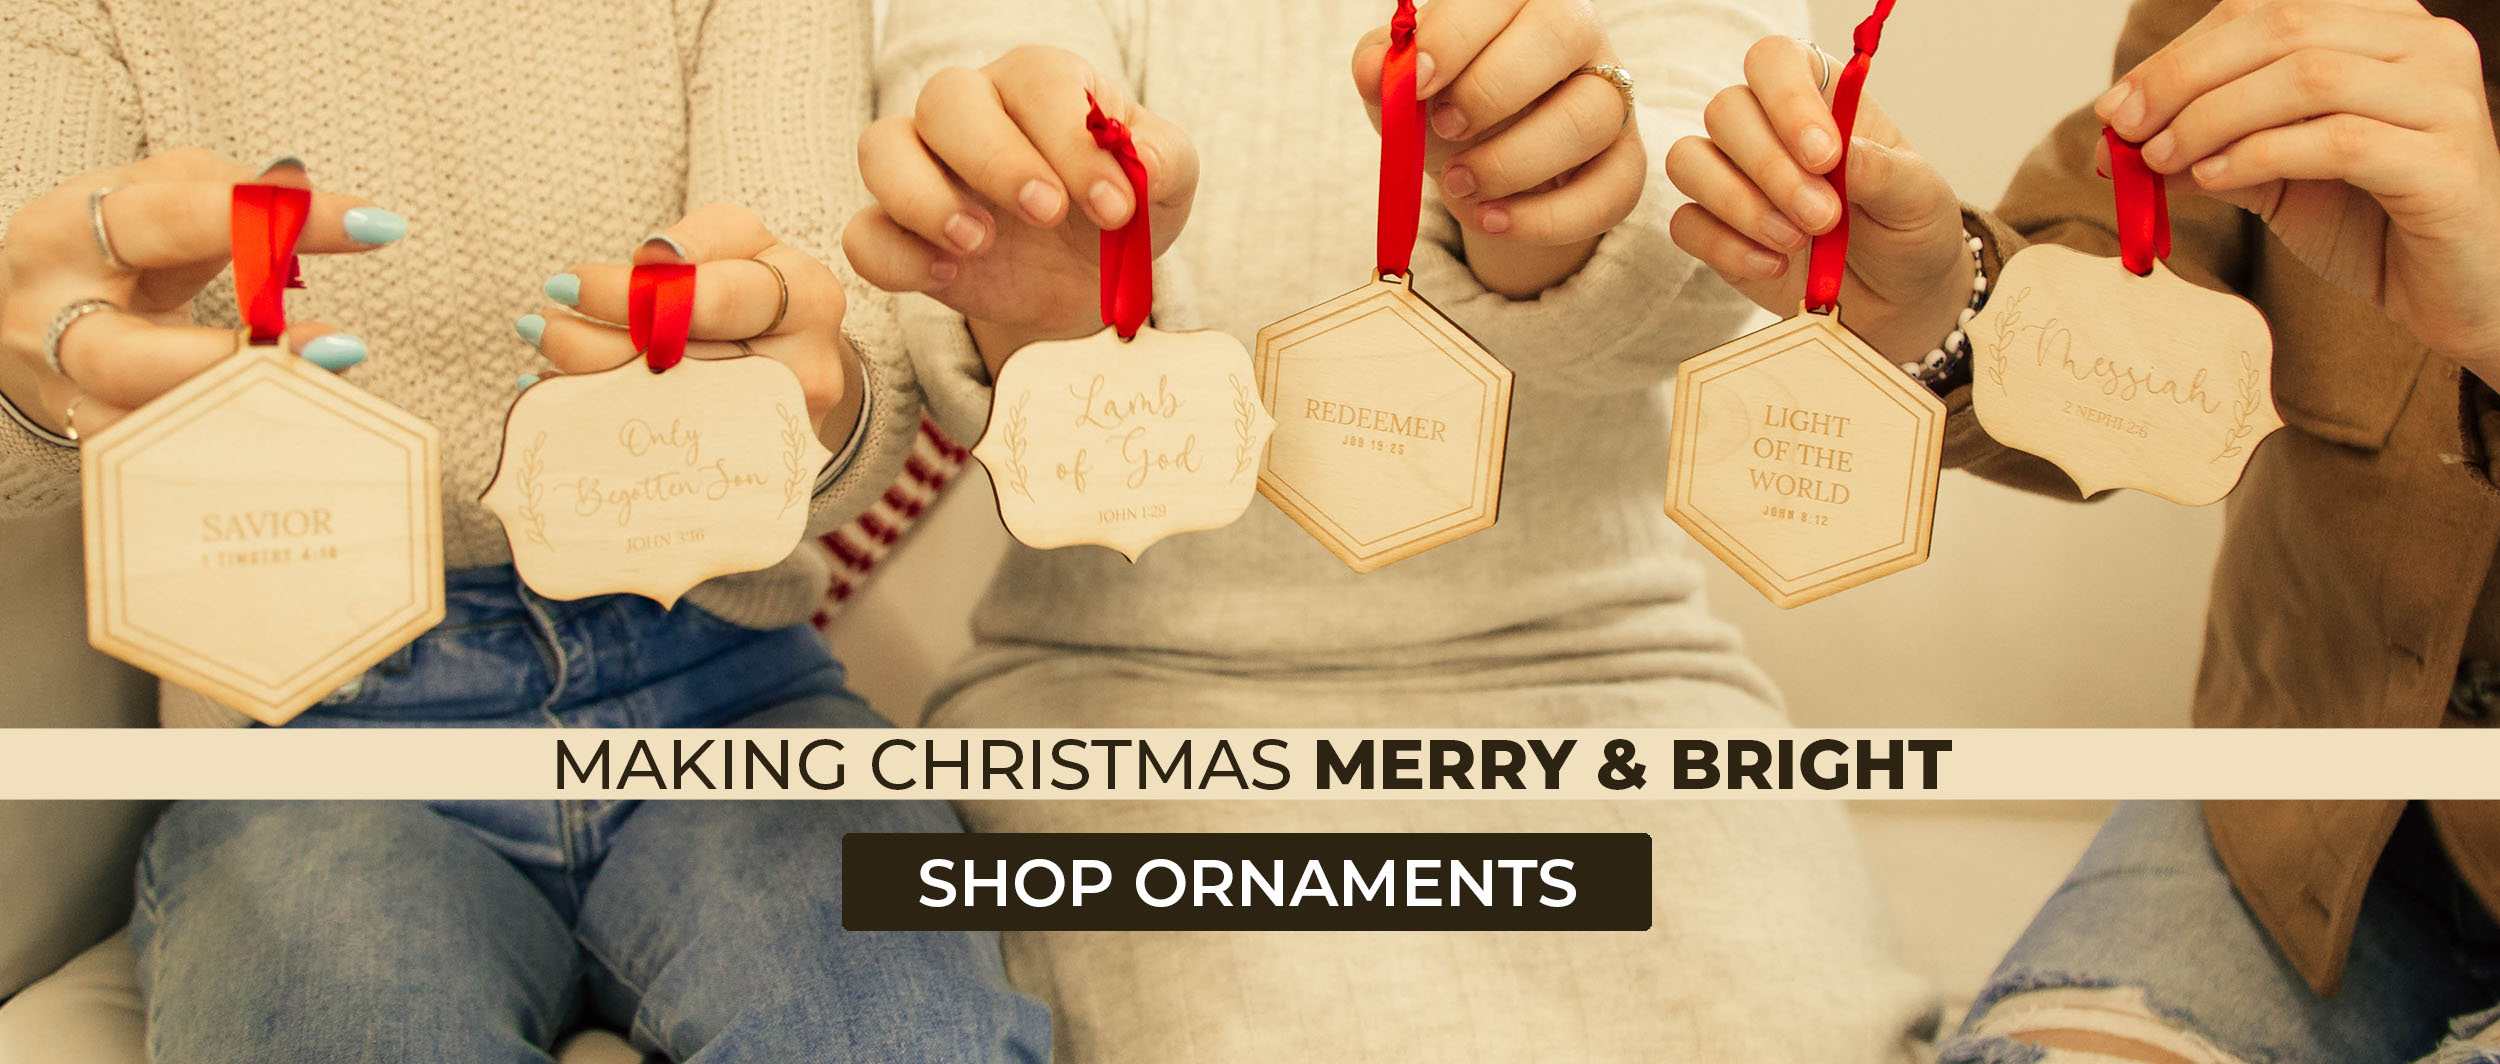 LDS Ornaments and Ornament Sets